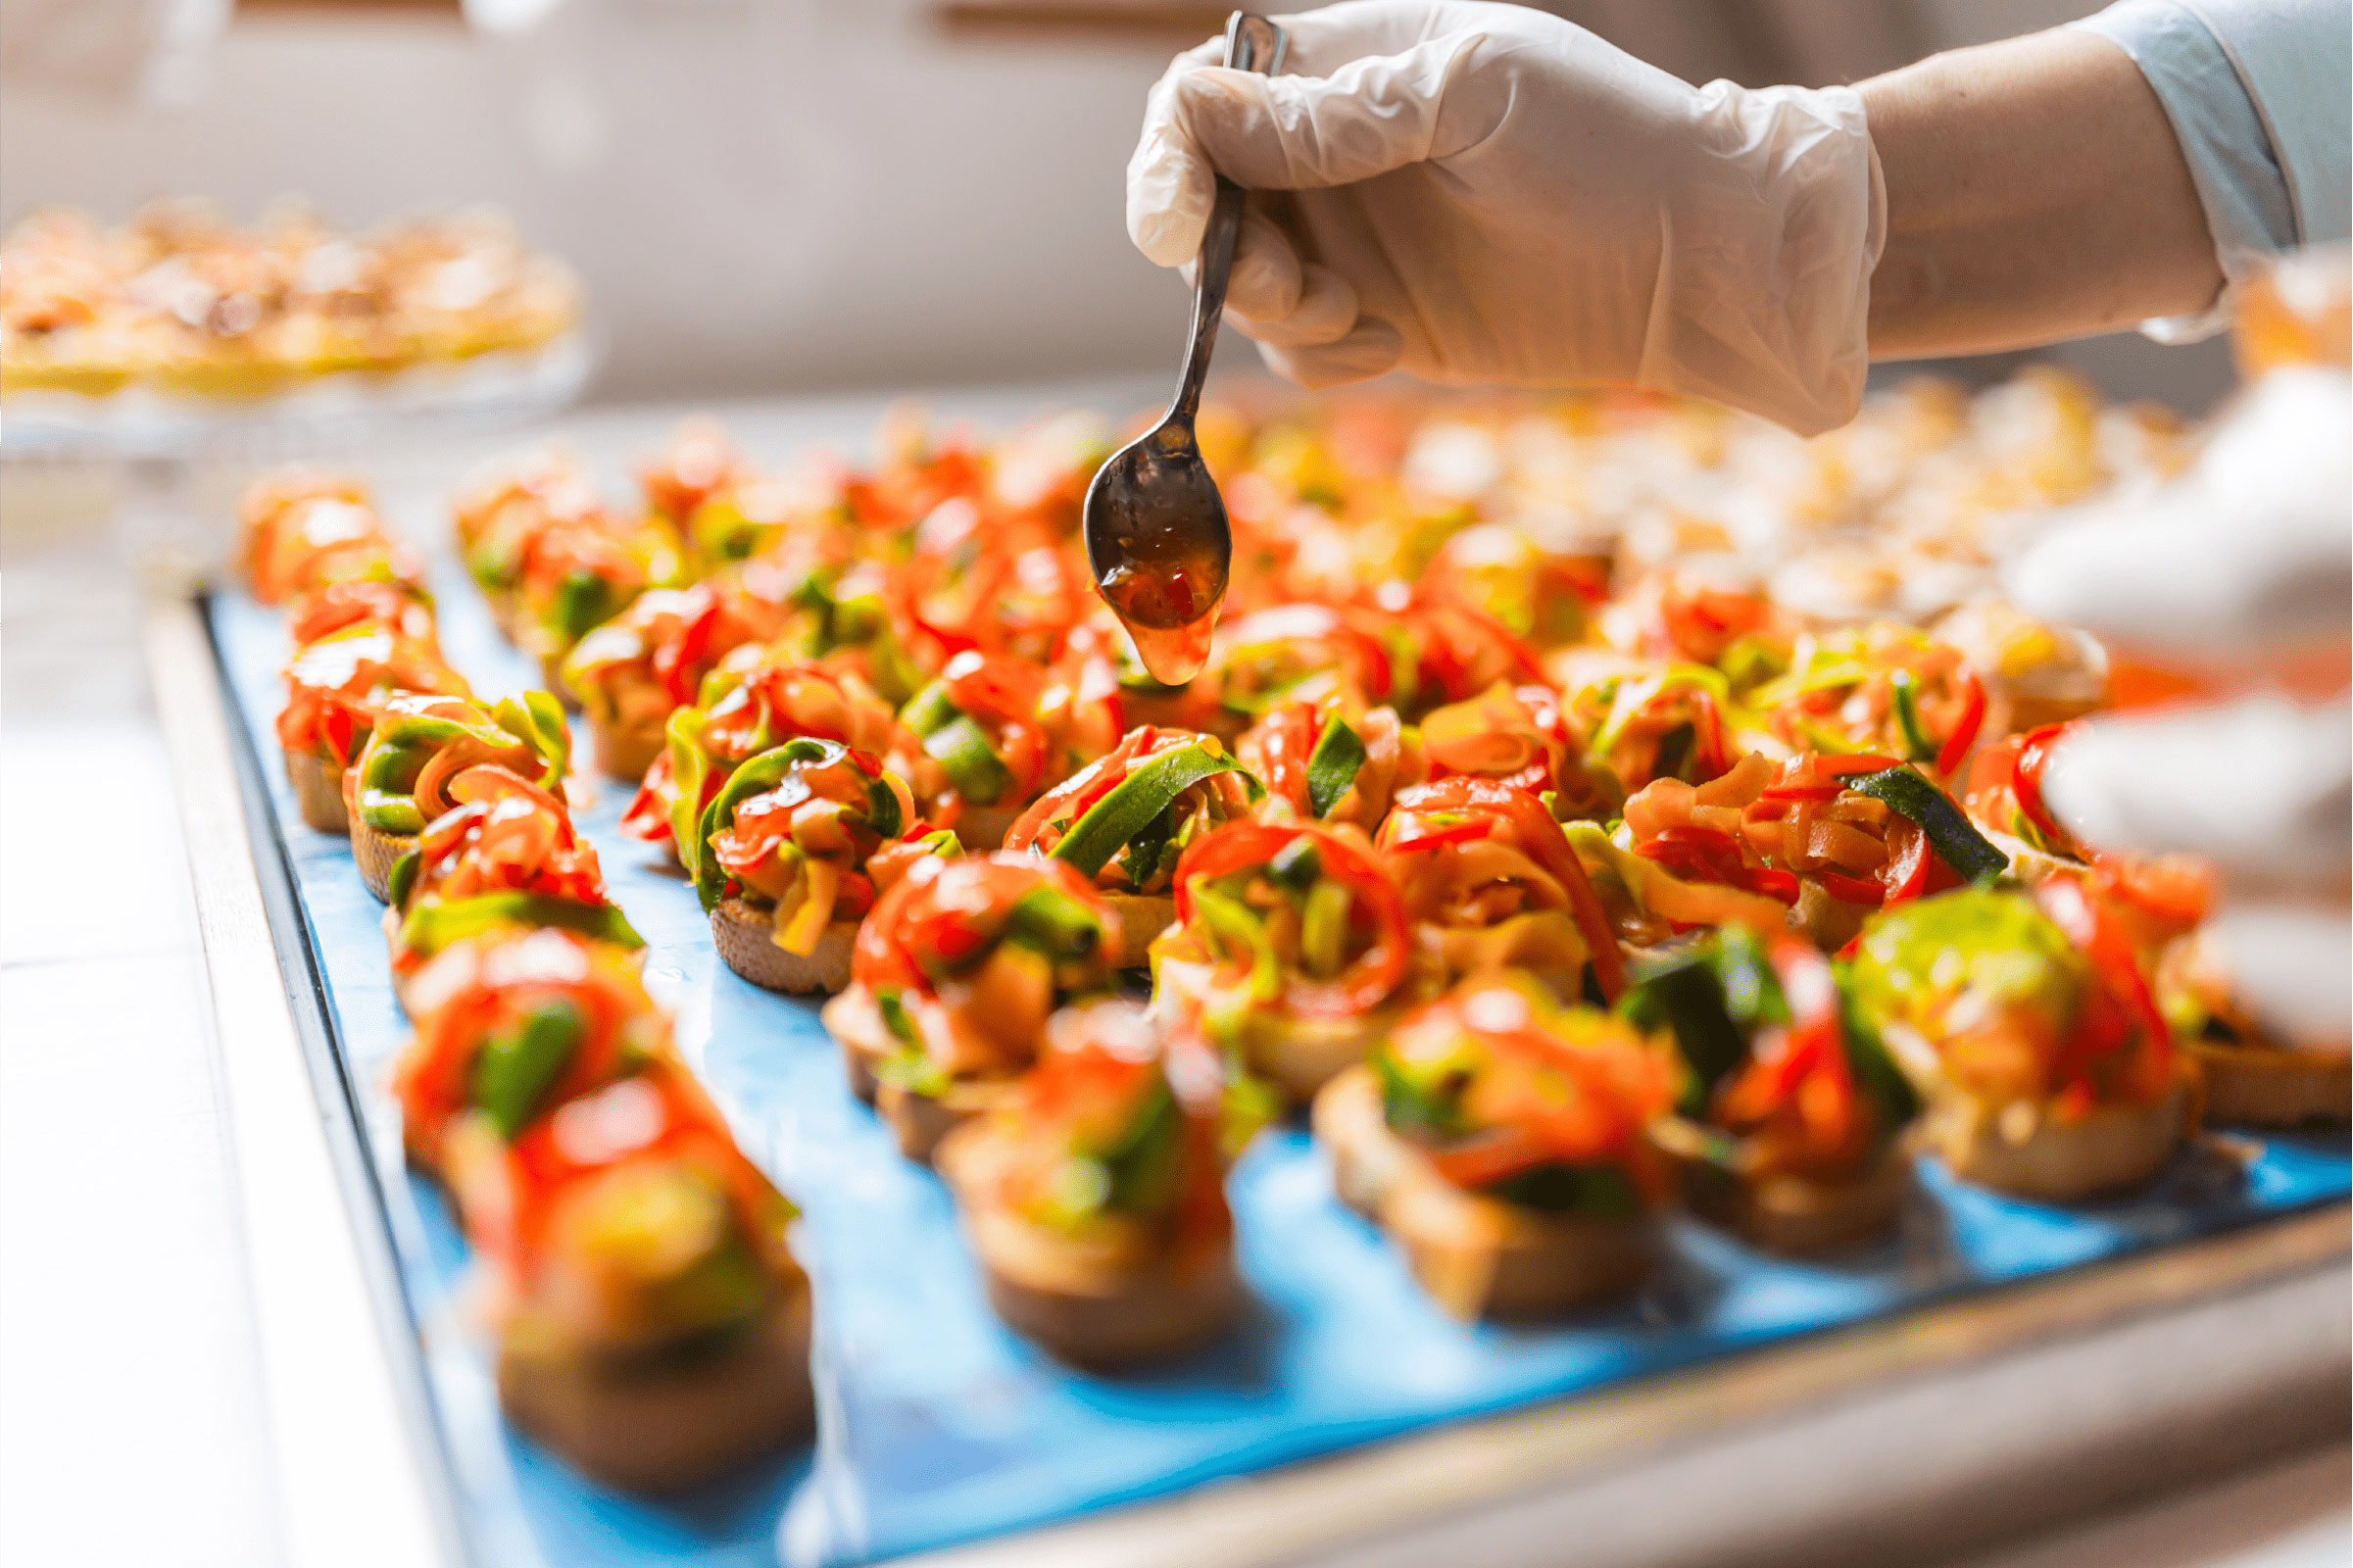 Food Safety In Catering